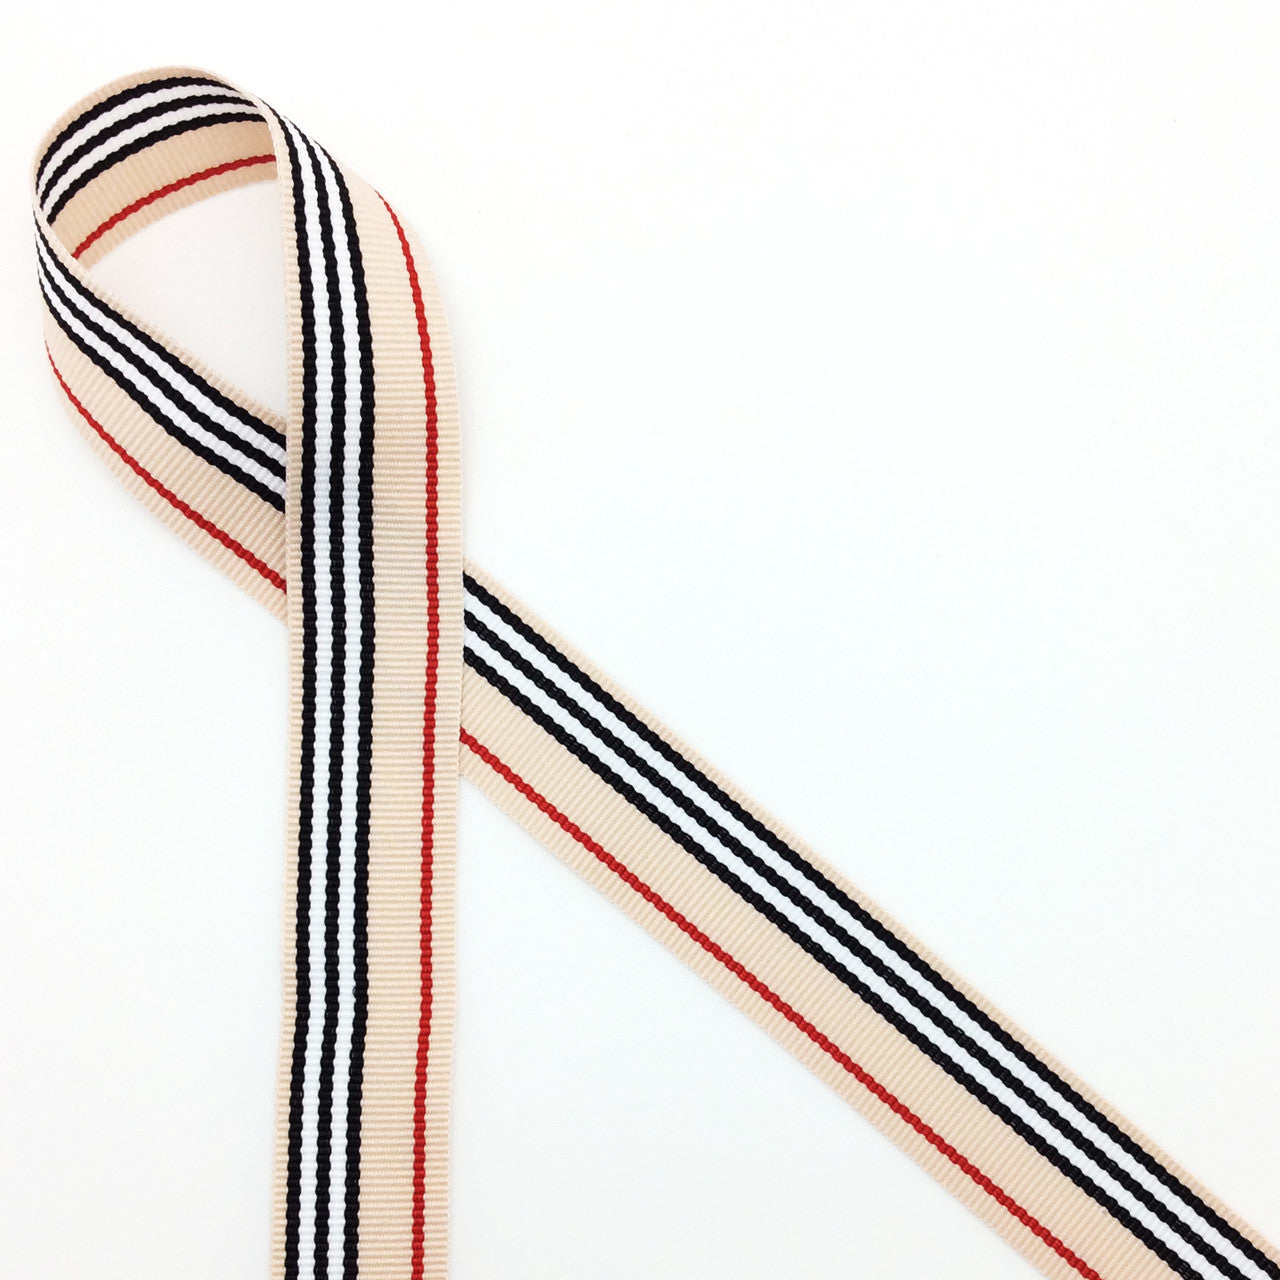 Stripes of Tan, white, black and red woven grosgrain ribbon, 10 Yards